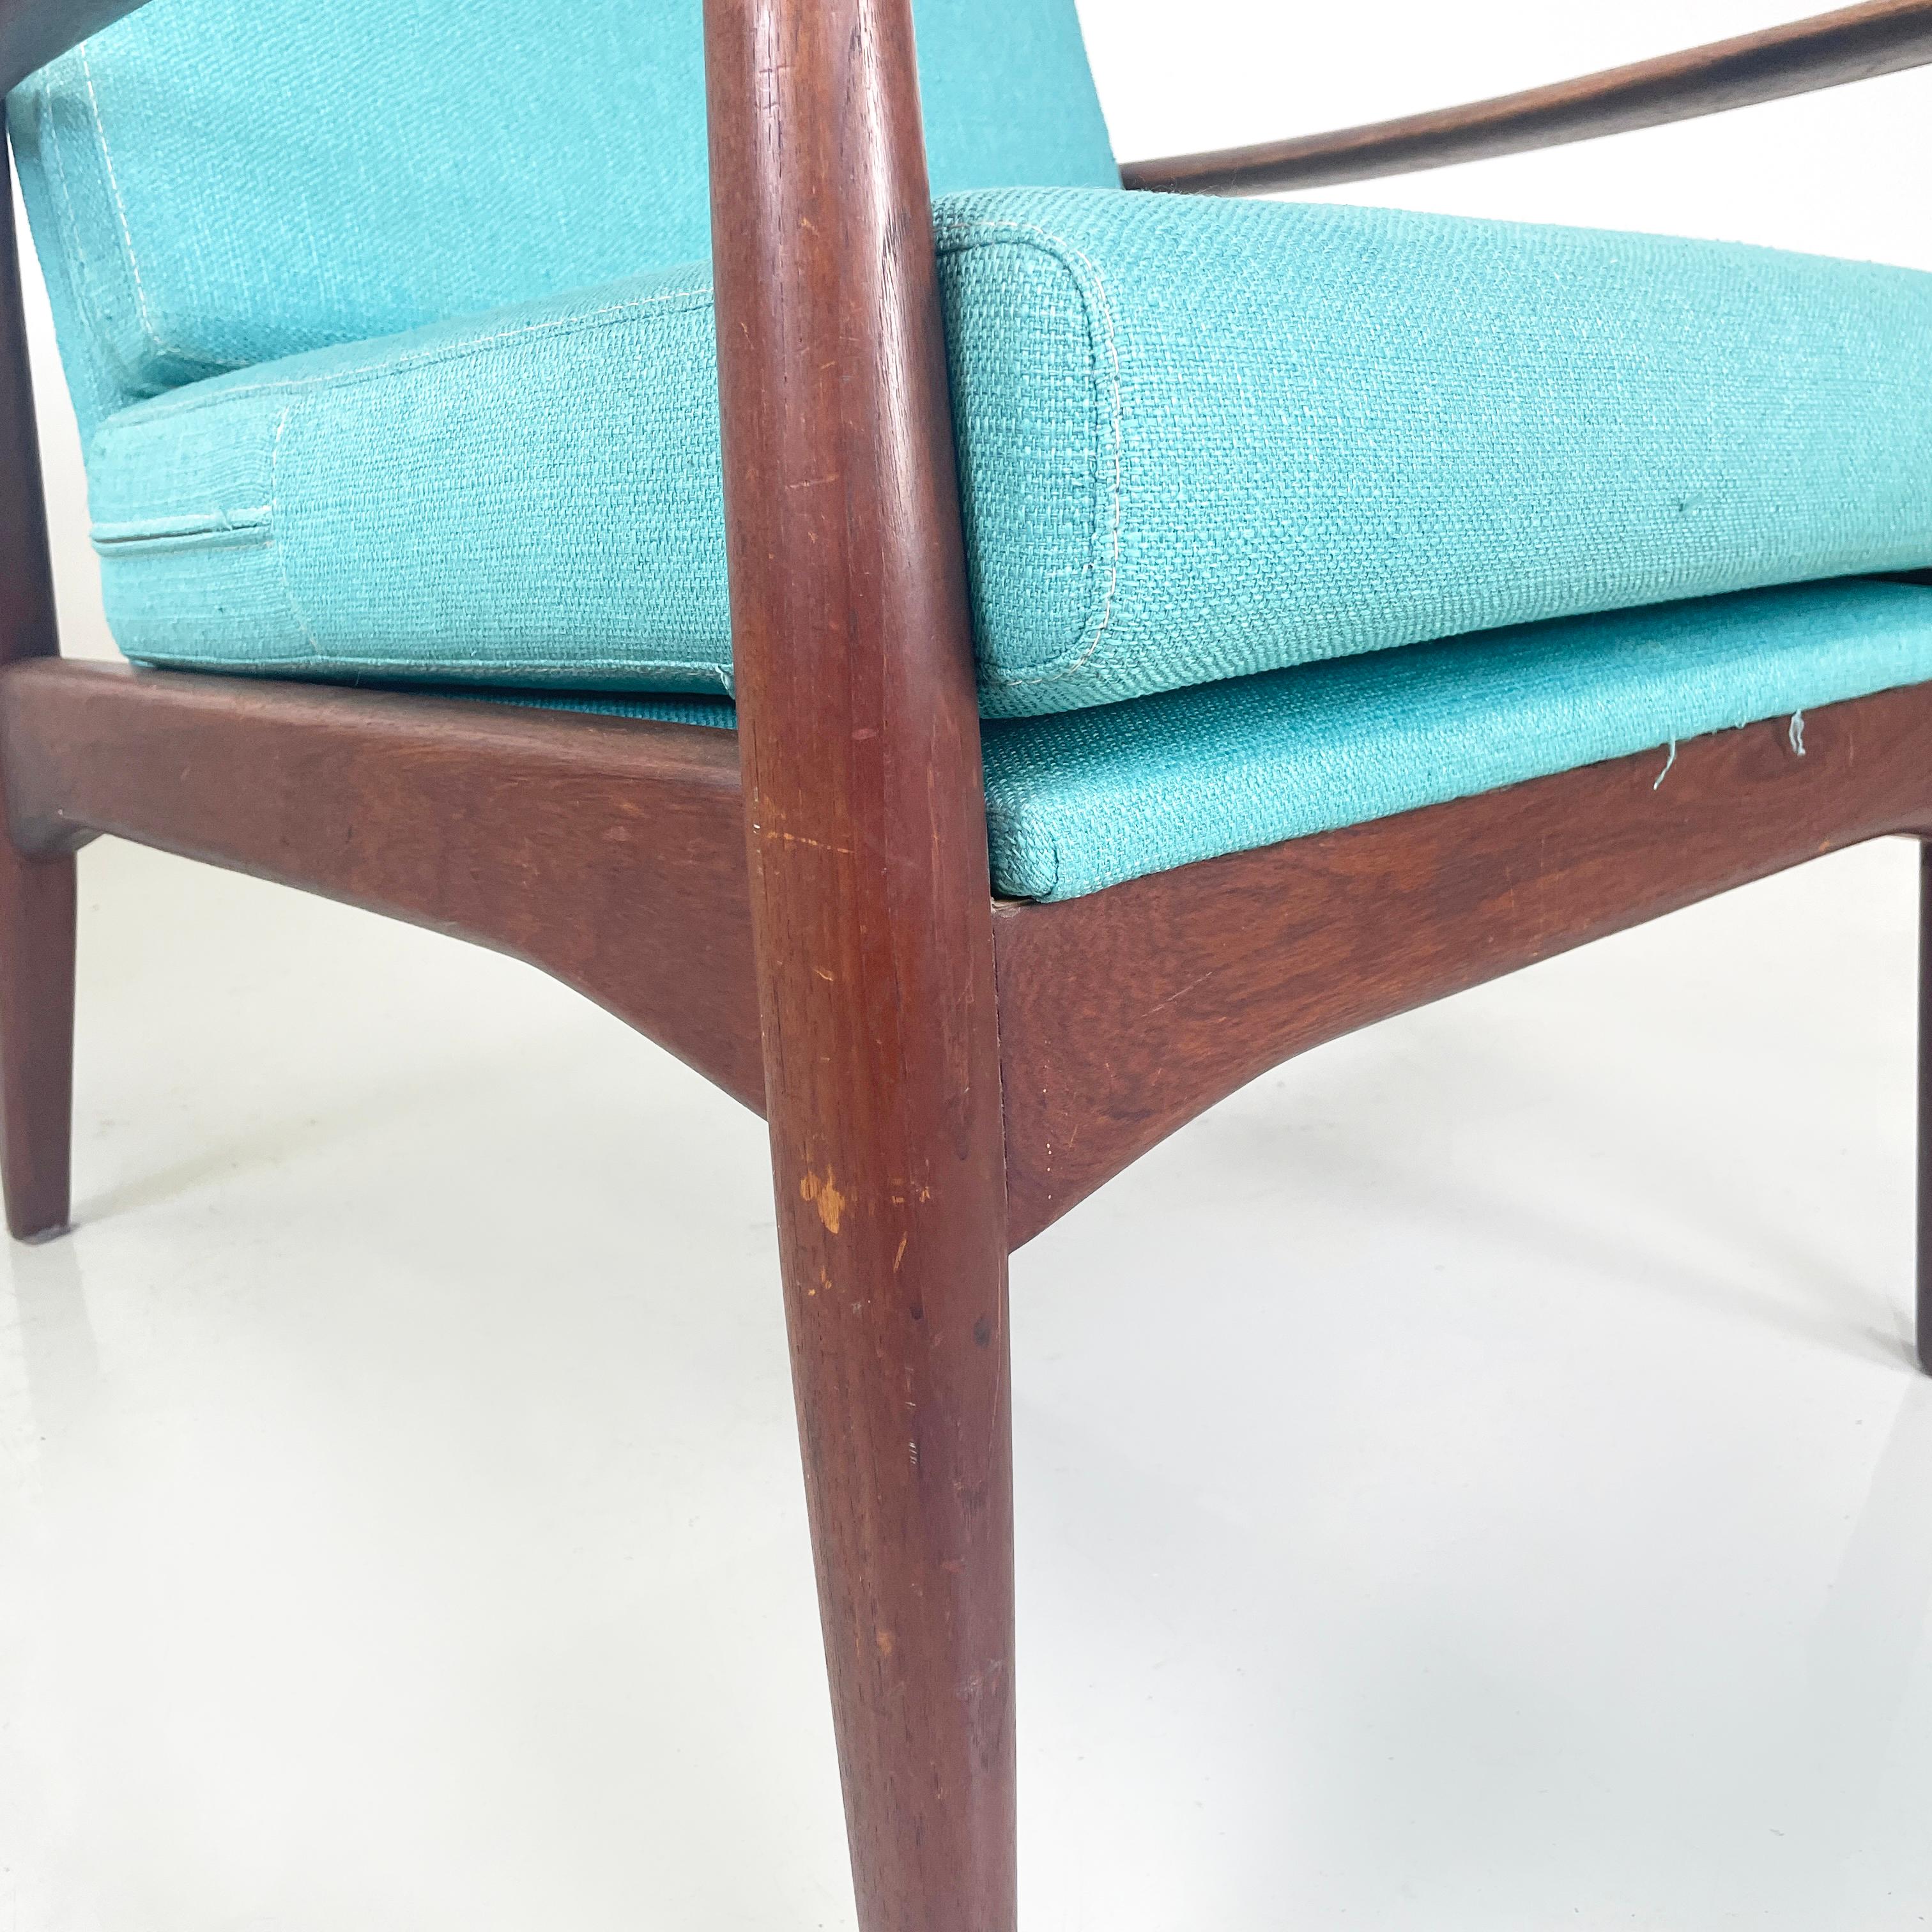 European mid-century modern Armchairs in light blue fabric and wood, 1960s For Sale 5